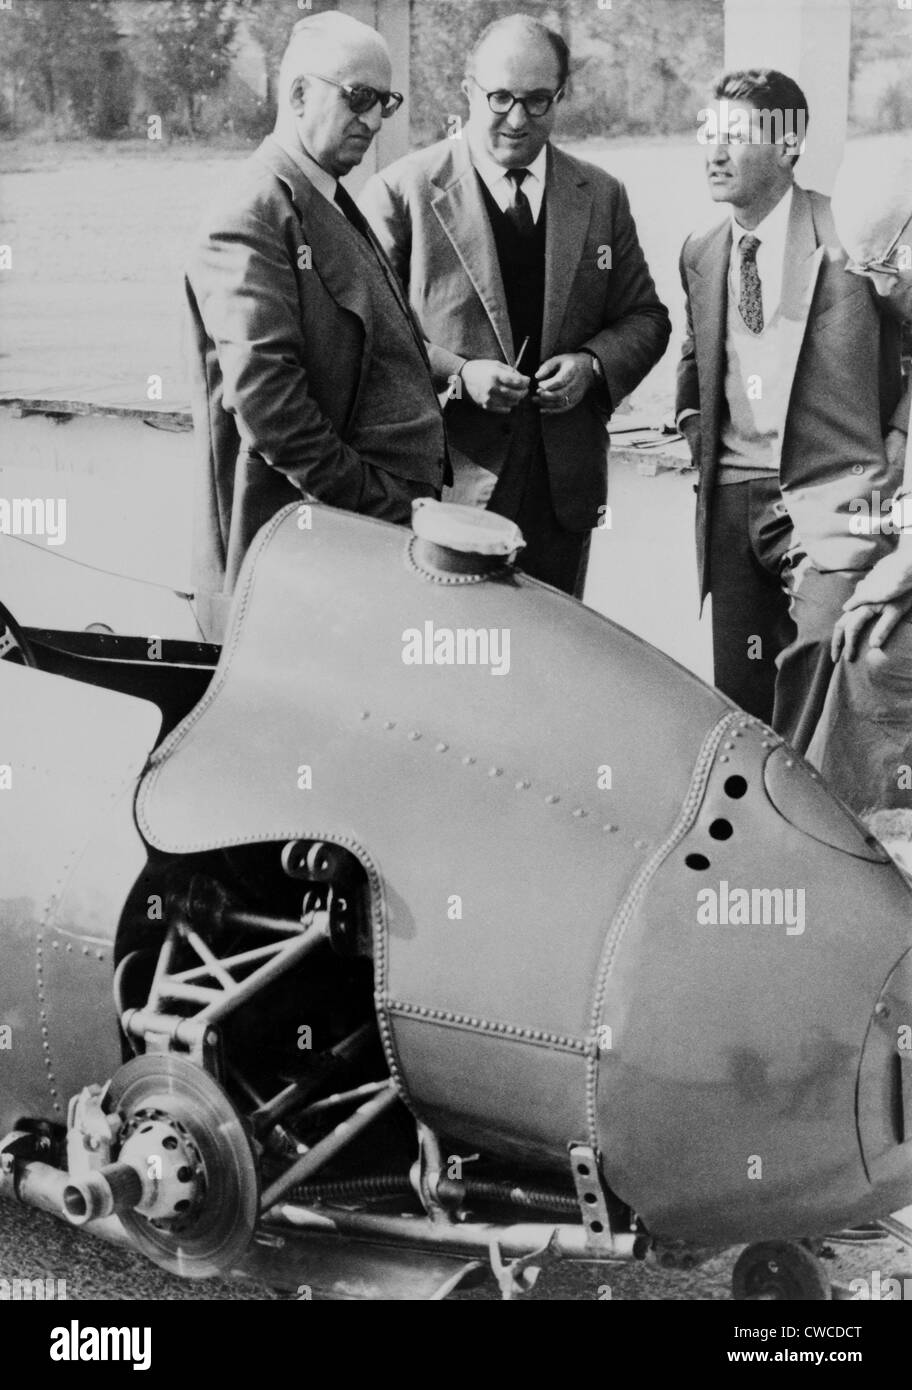 Enzo Ferrari (left), founder and owner of the Ferrari Auto factories Modena, Italy, looks over a 1959 racing car with Stock Photo